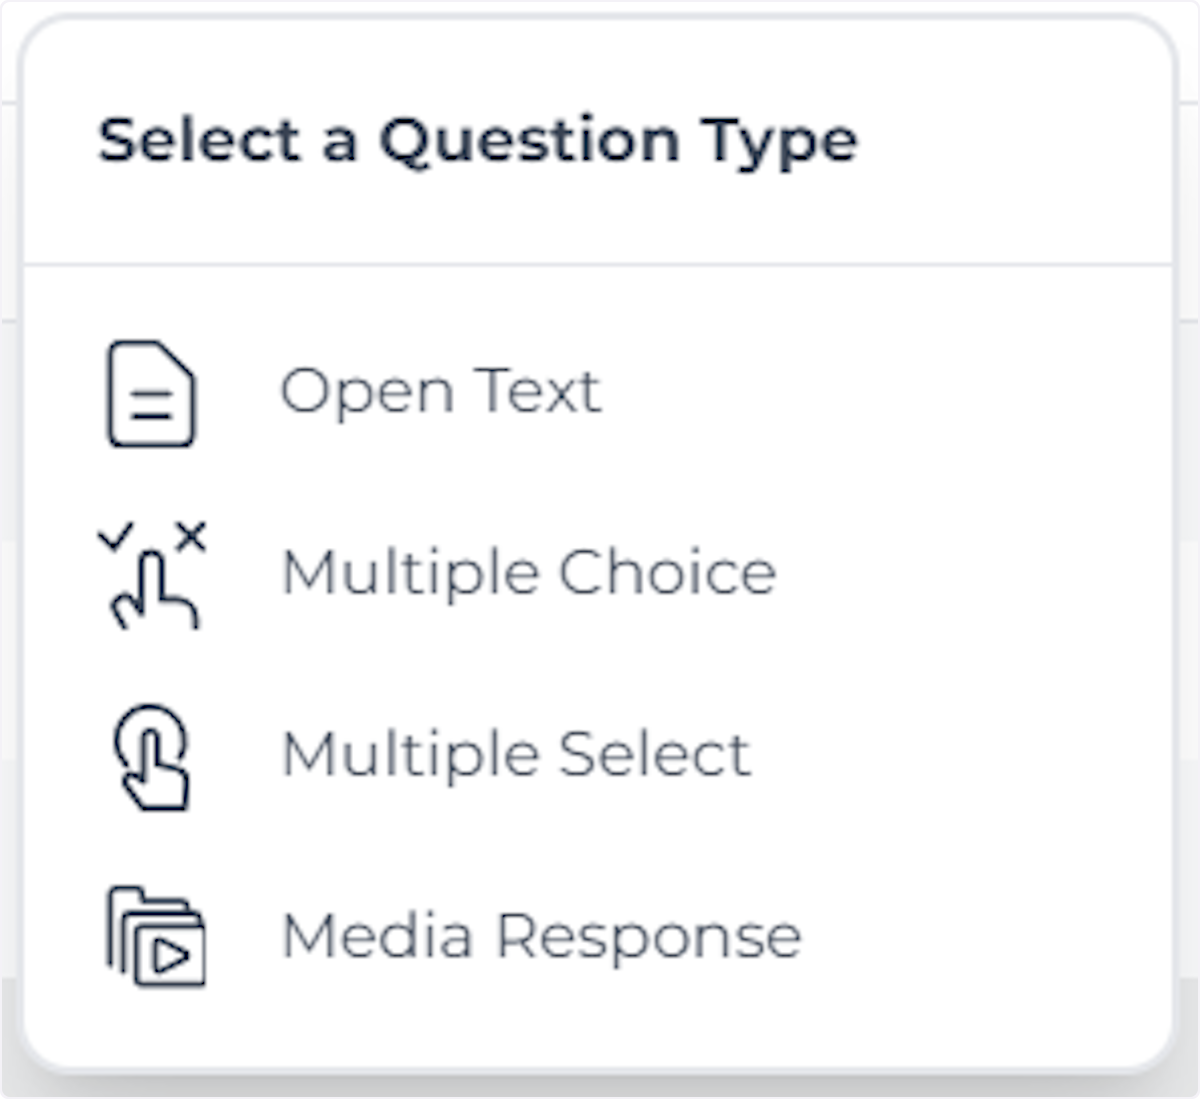 Select the Question Type.